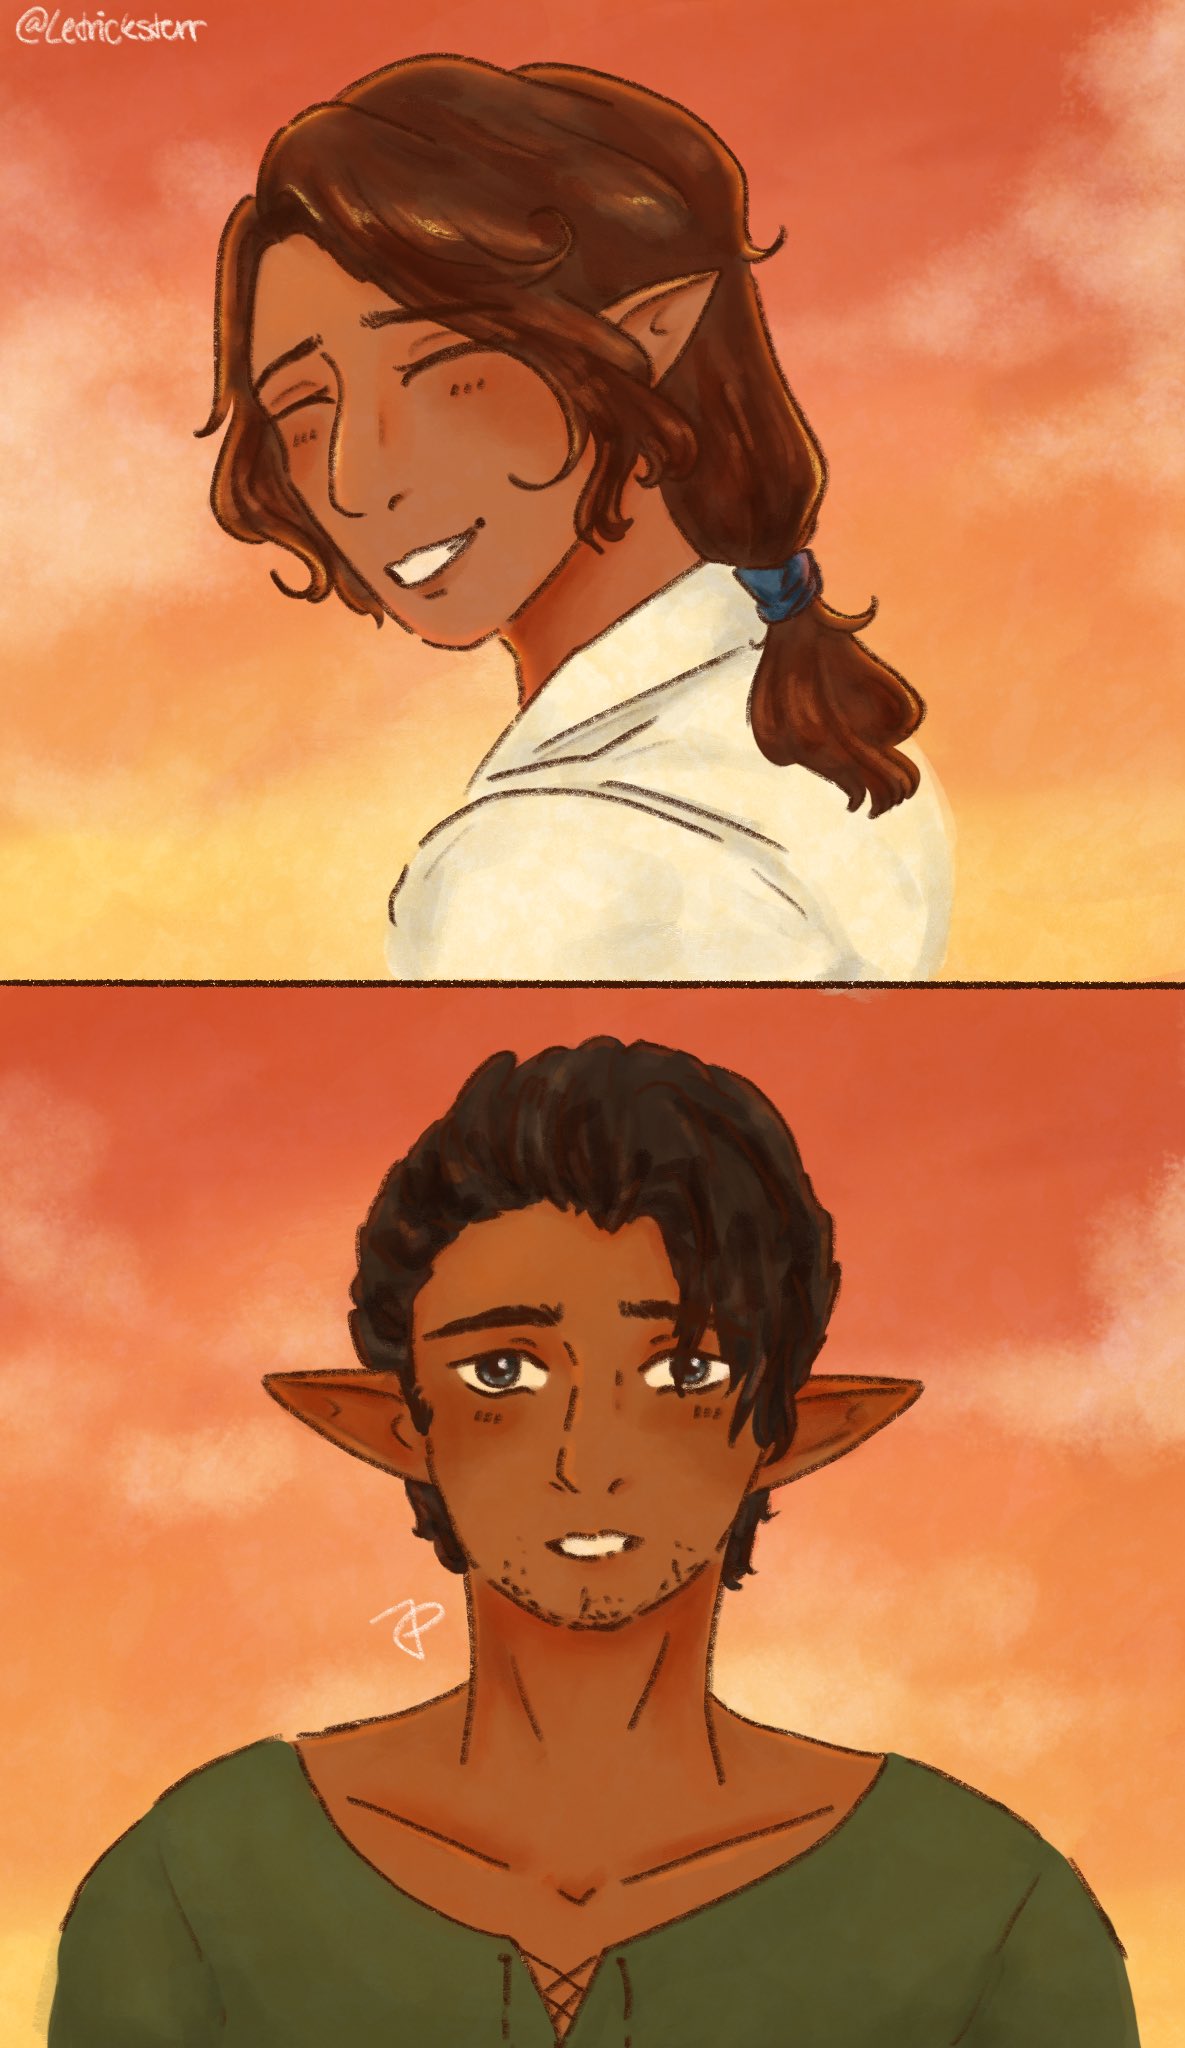 A two panel drawing of two original characters from Final Fantasy XIV, Fallereaux and Devinoux. In the first panel, a teenage Fallereaux is looking back over his shoulder, lit by a sunset, his eyes are closed and he smiles happily. He is an elf with tan skin and long brown hair that is tied low on his head. In the second panel, a teenage Devinoux looks on in awe. He is an elf with darker skin and short black hair, he is just starting to grow some stubble and has large gray eyes.